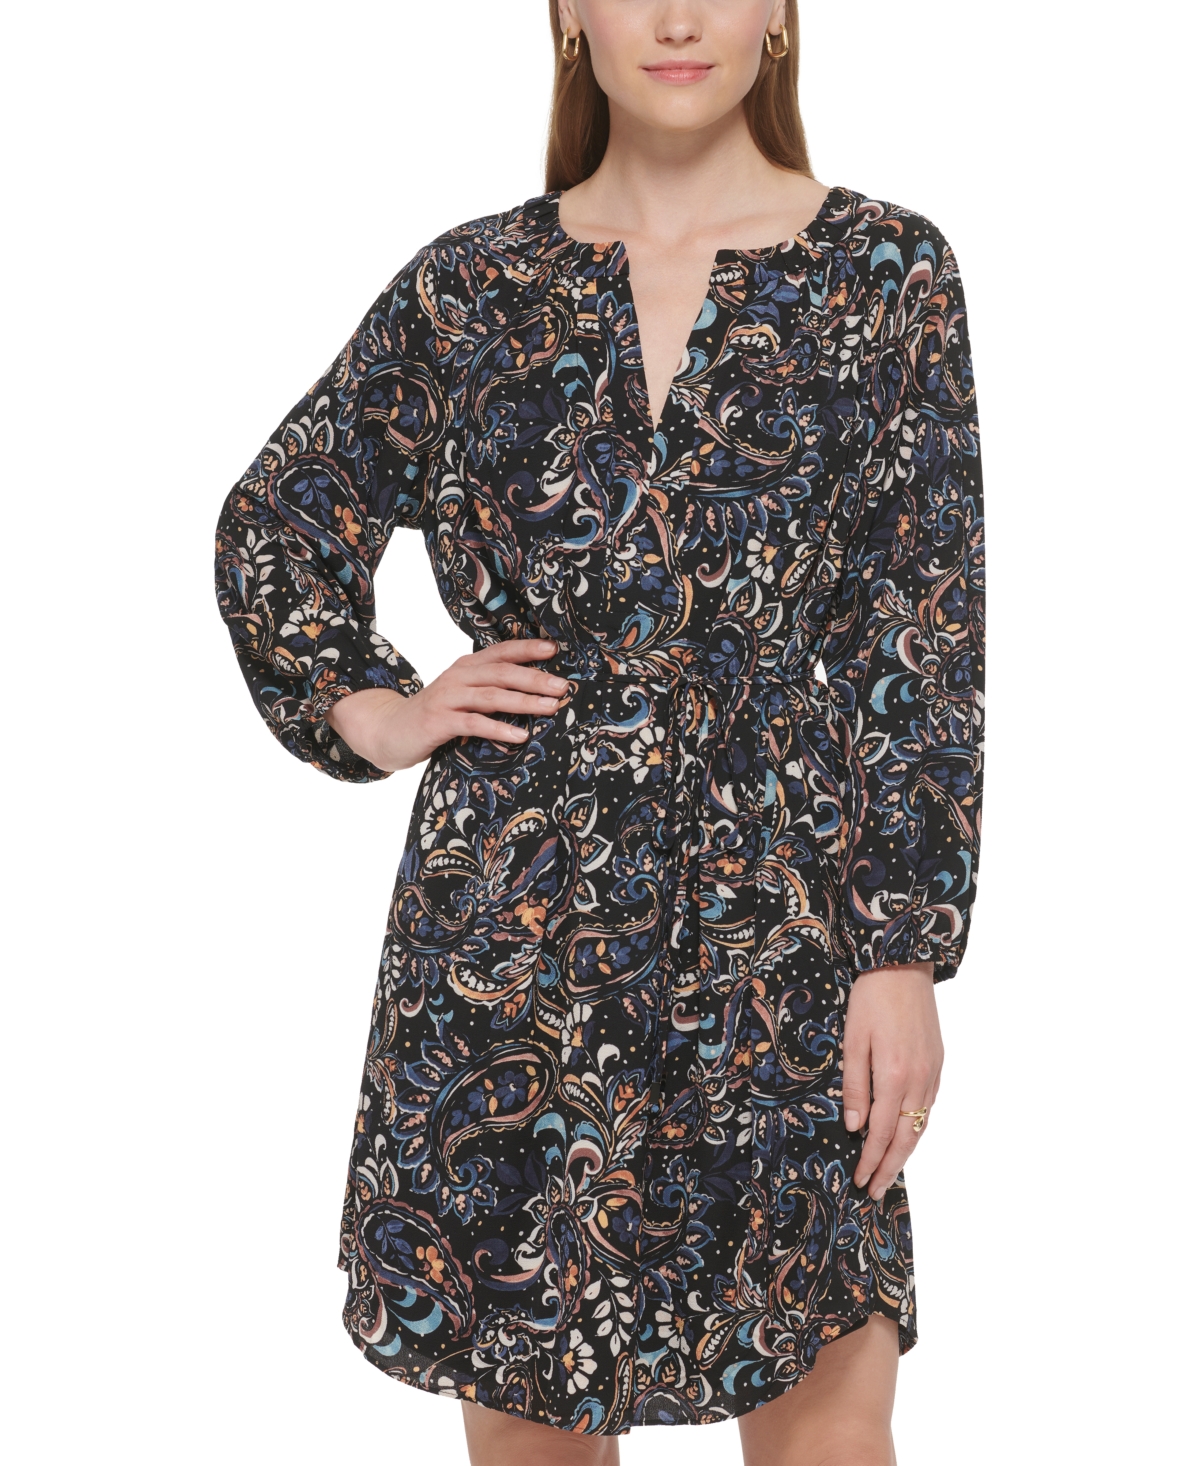 Vince Camuto Women's Printed Balloon-Sleeve Belted Dress